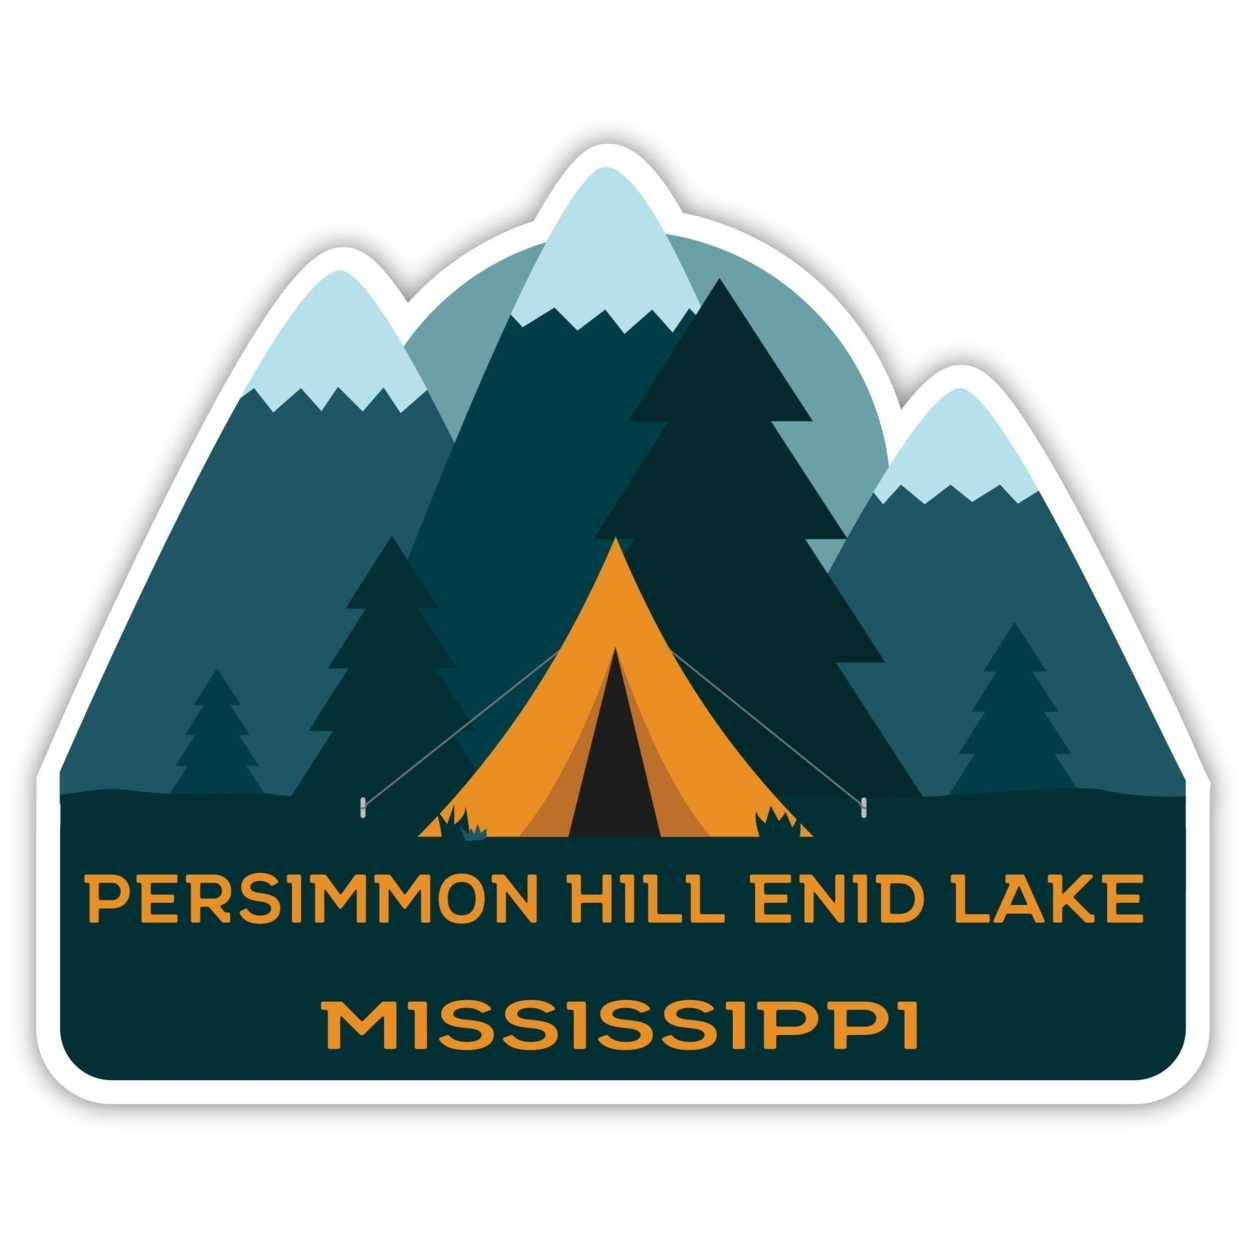 Persimmon Hill Enid Lake Mississippi Souvenir Decorative Stickers (Choose Theme And Size) - Single Unit, 2-Inch, Tent